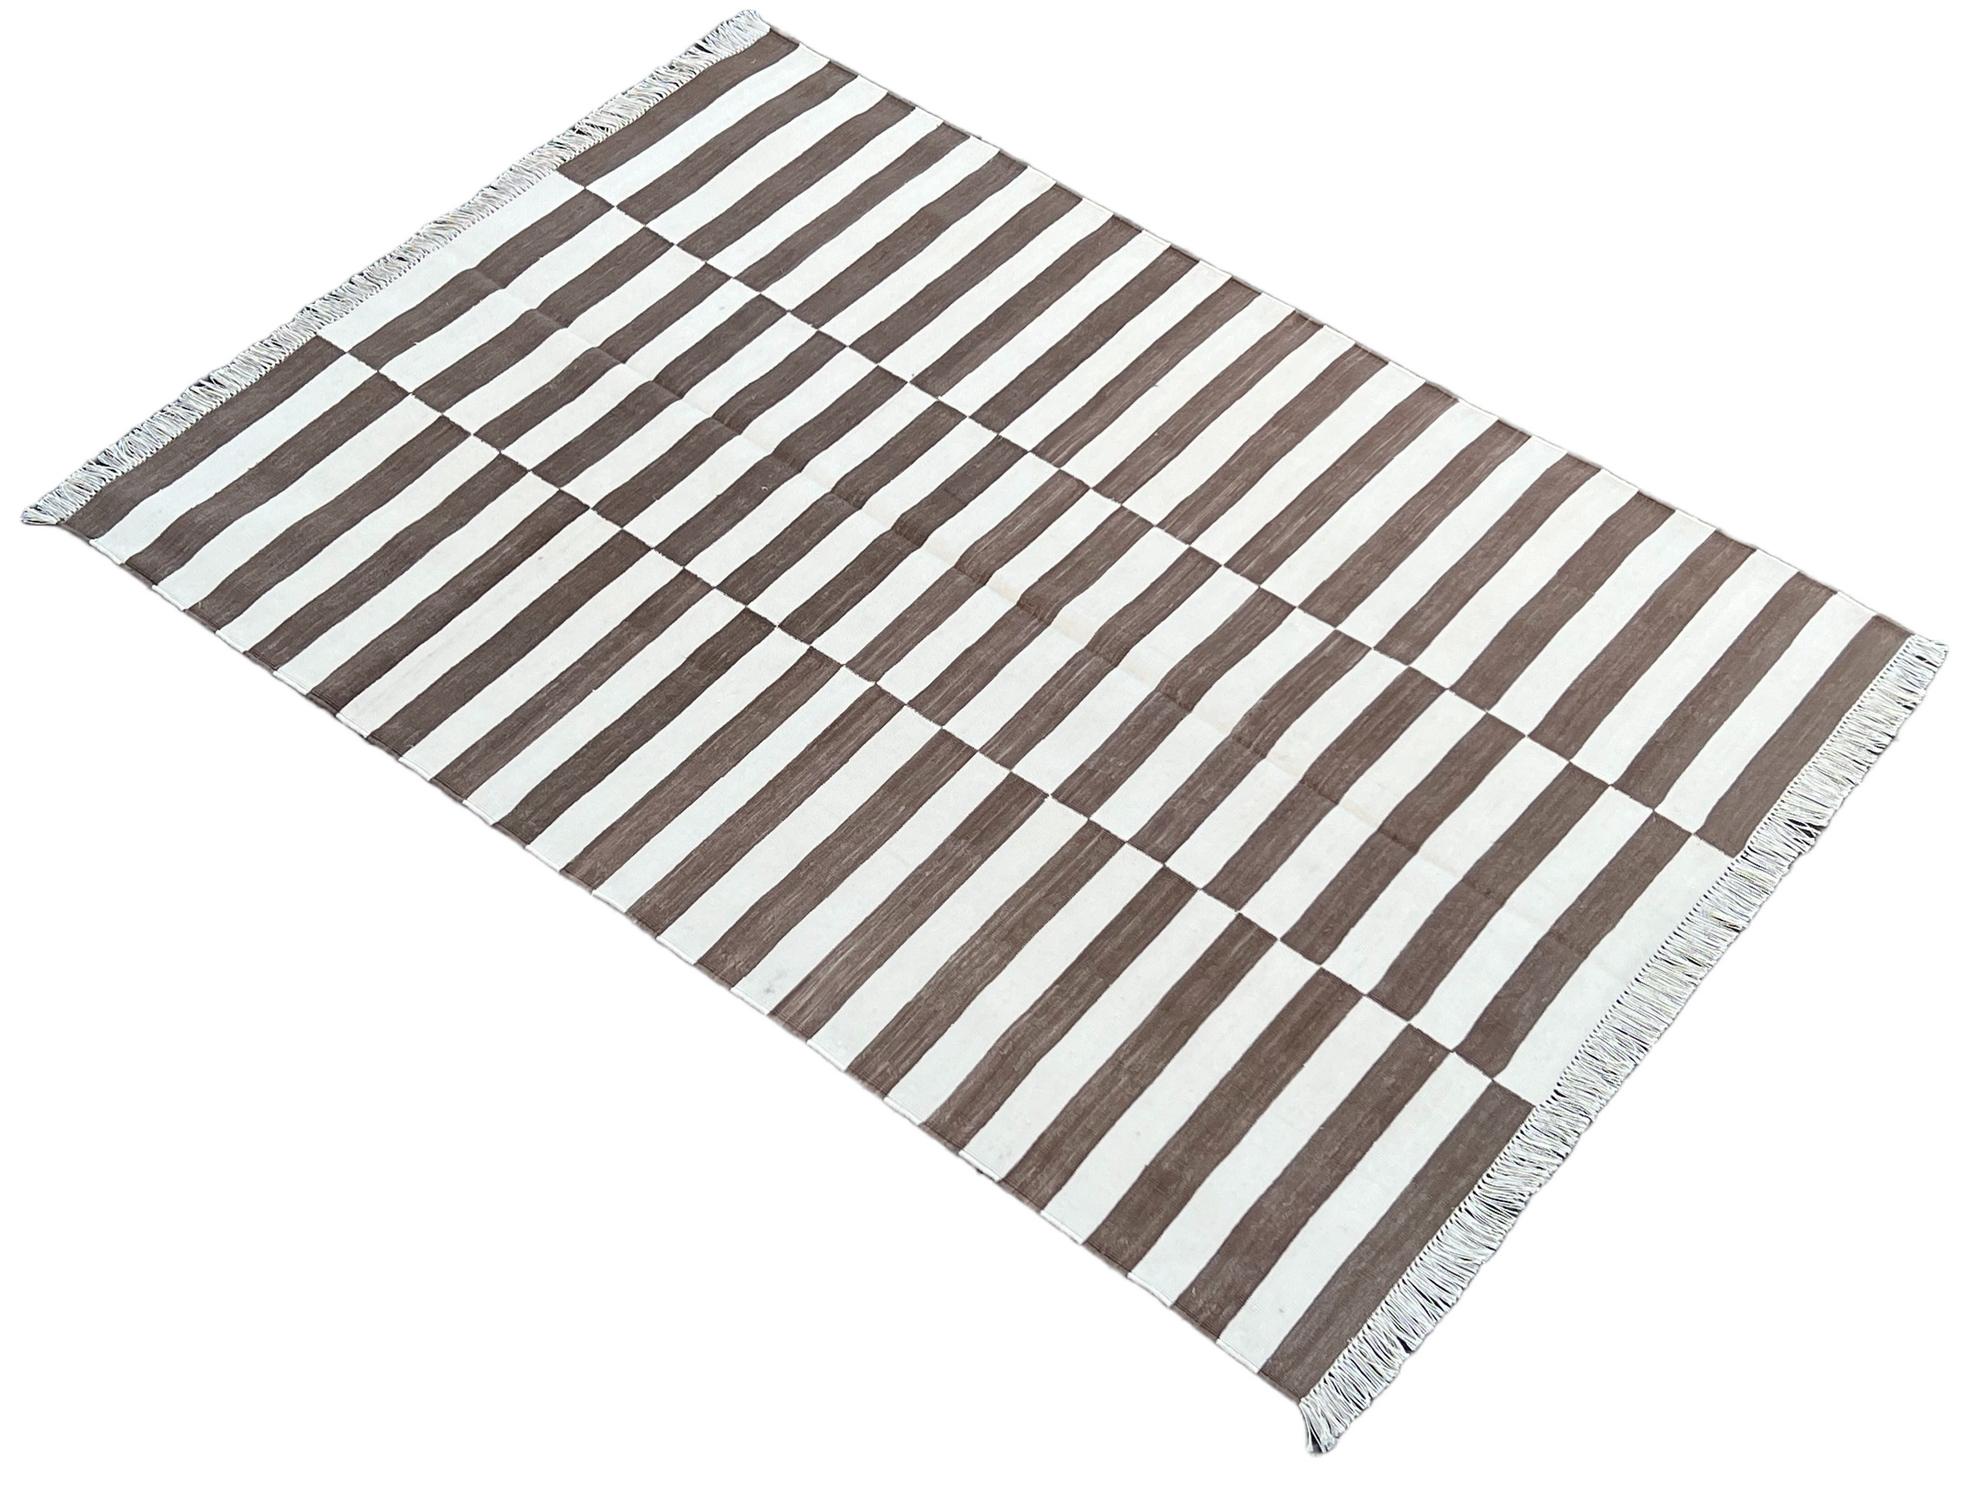 Cotton Vegetable Dyed Brown And White Striped Indian Dhurrie Rug-4'x6' 
These special flat-weave dhurries are hand-woven with 15 ply 100% cotton yarn. Due to the special manufacturing techniques used to create our rugs, the size and color of each